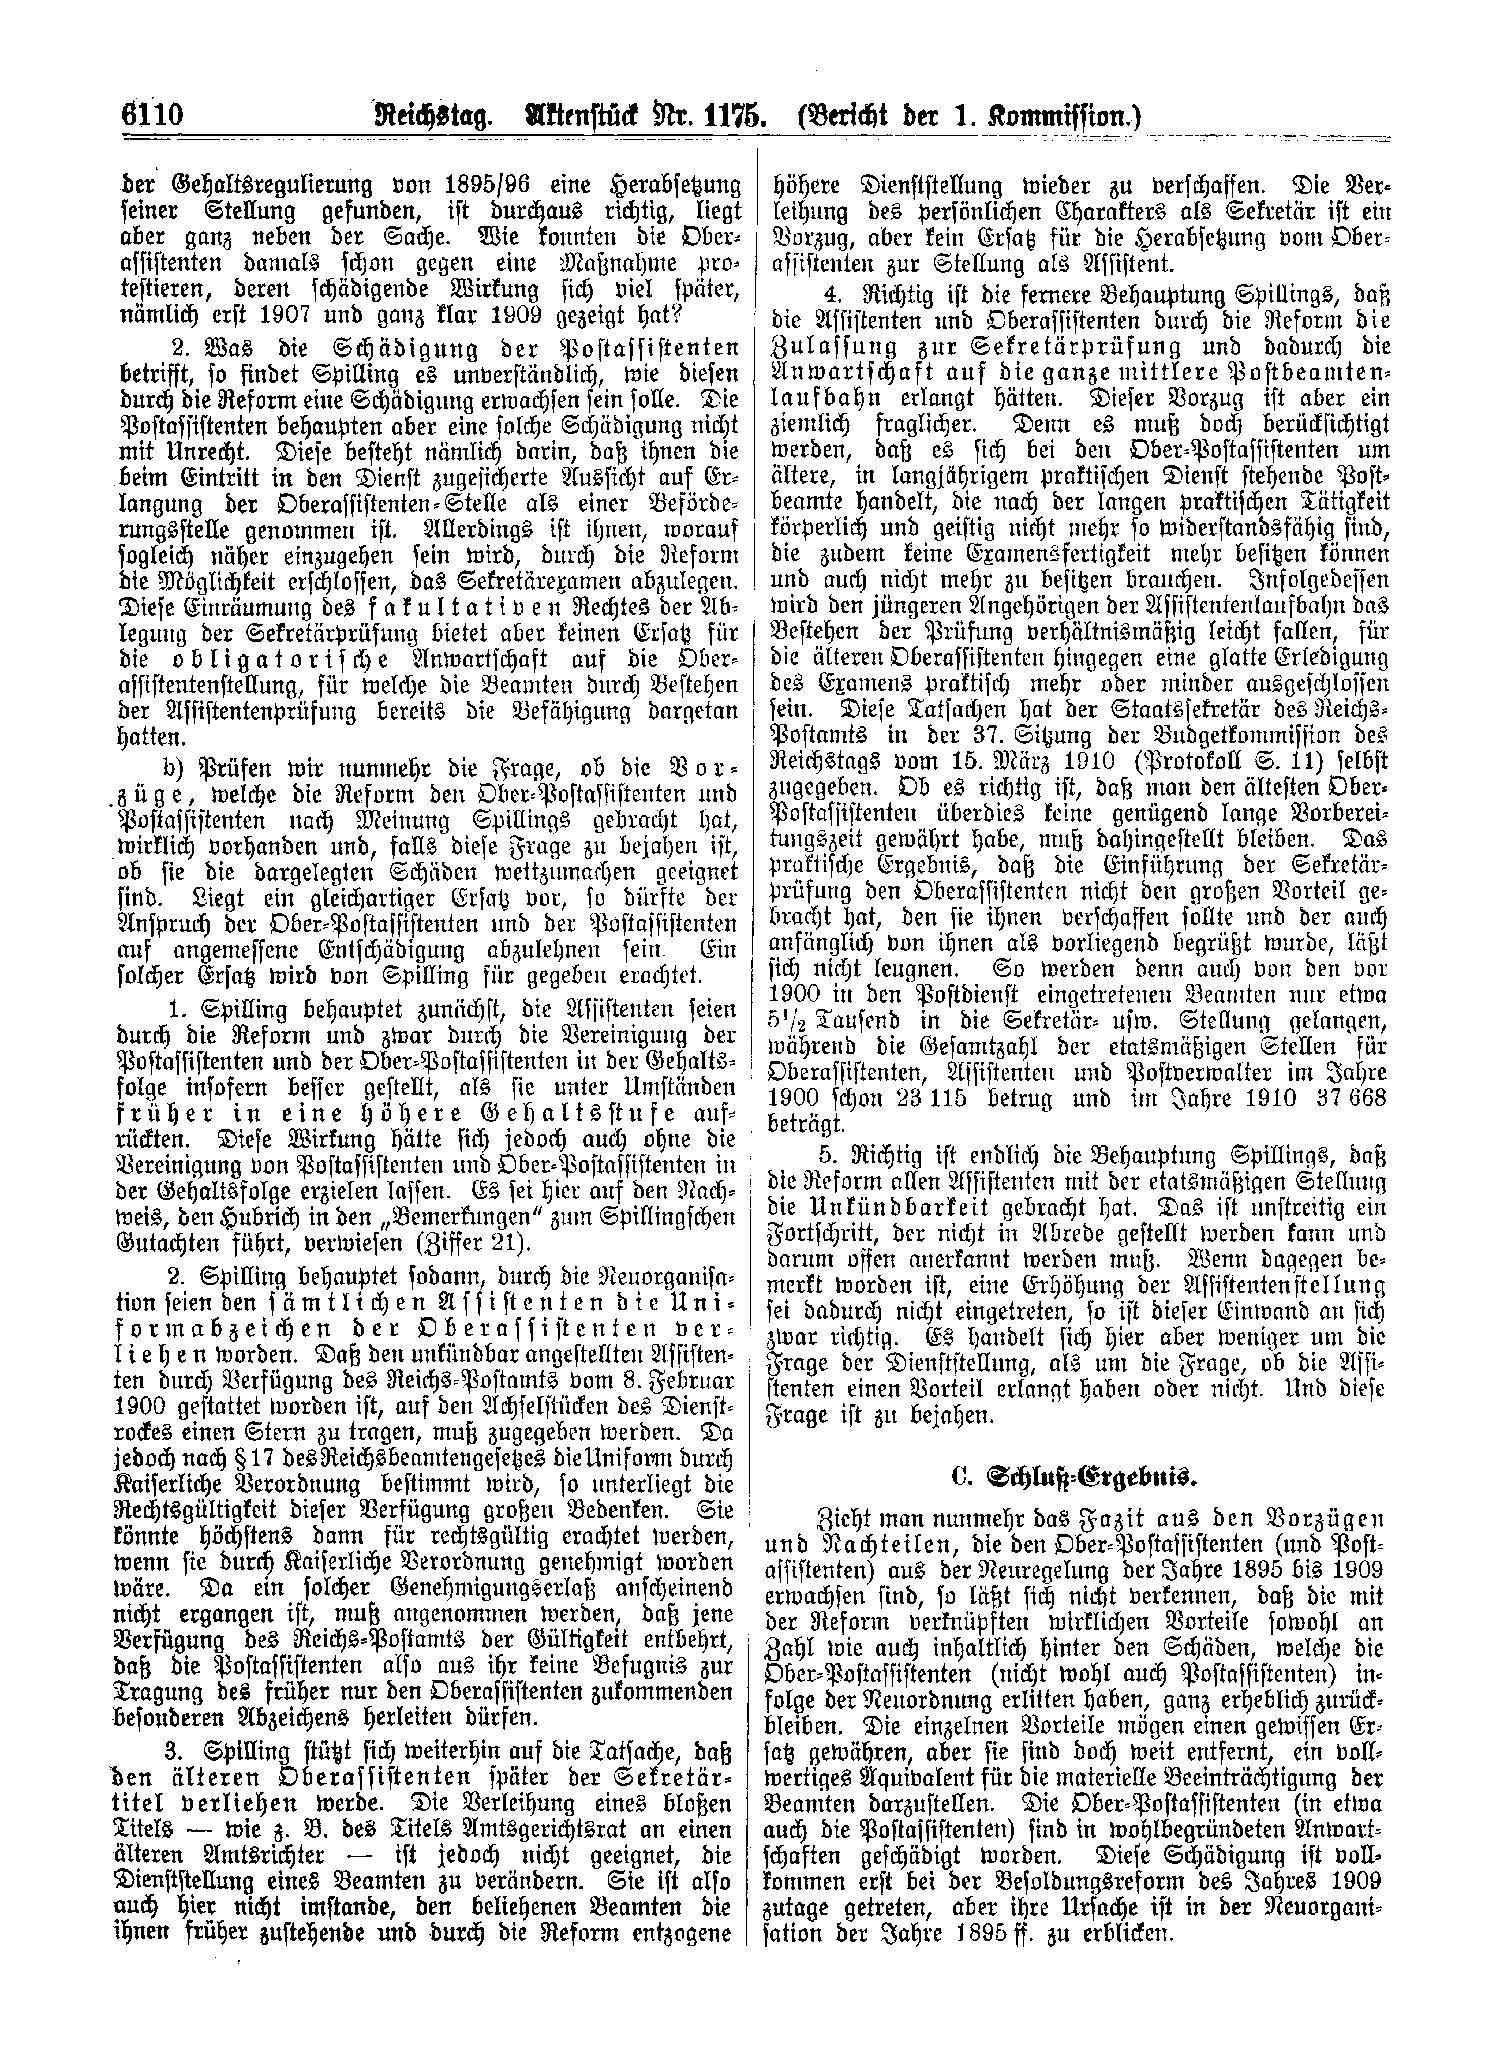 Scan of page 6110